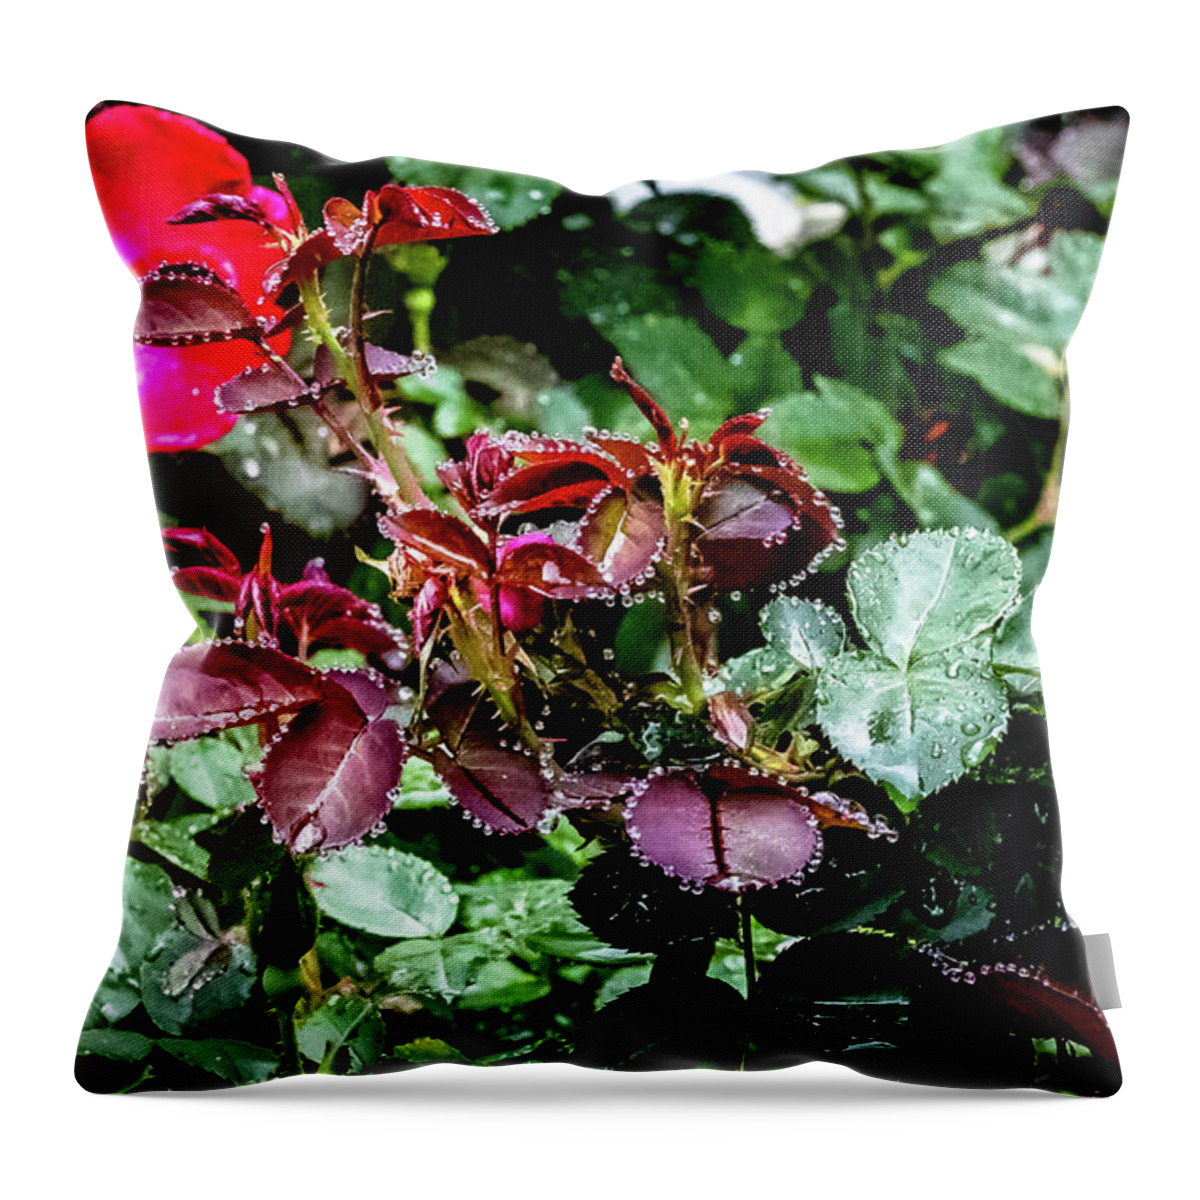 Raindrops Throw Pillow featuring the digital art Jewels of the Rain by Ed Stines